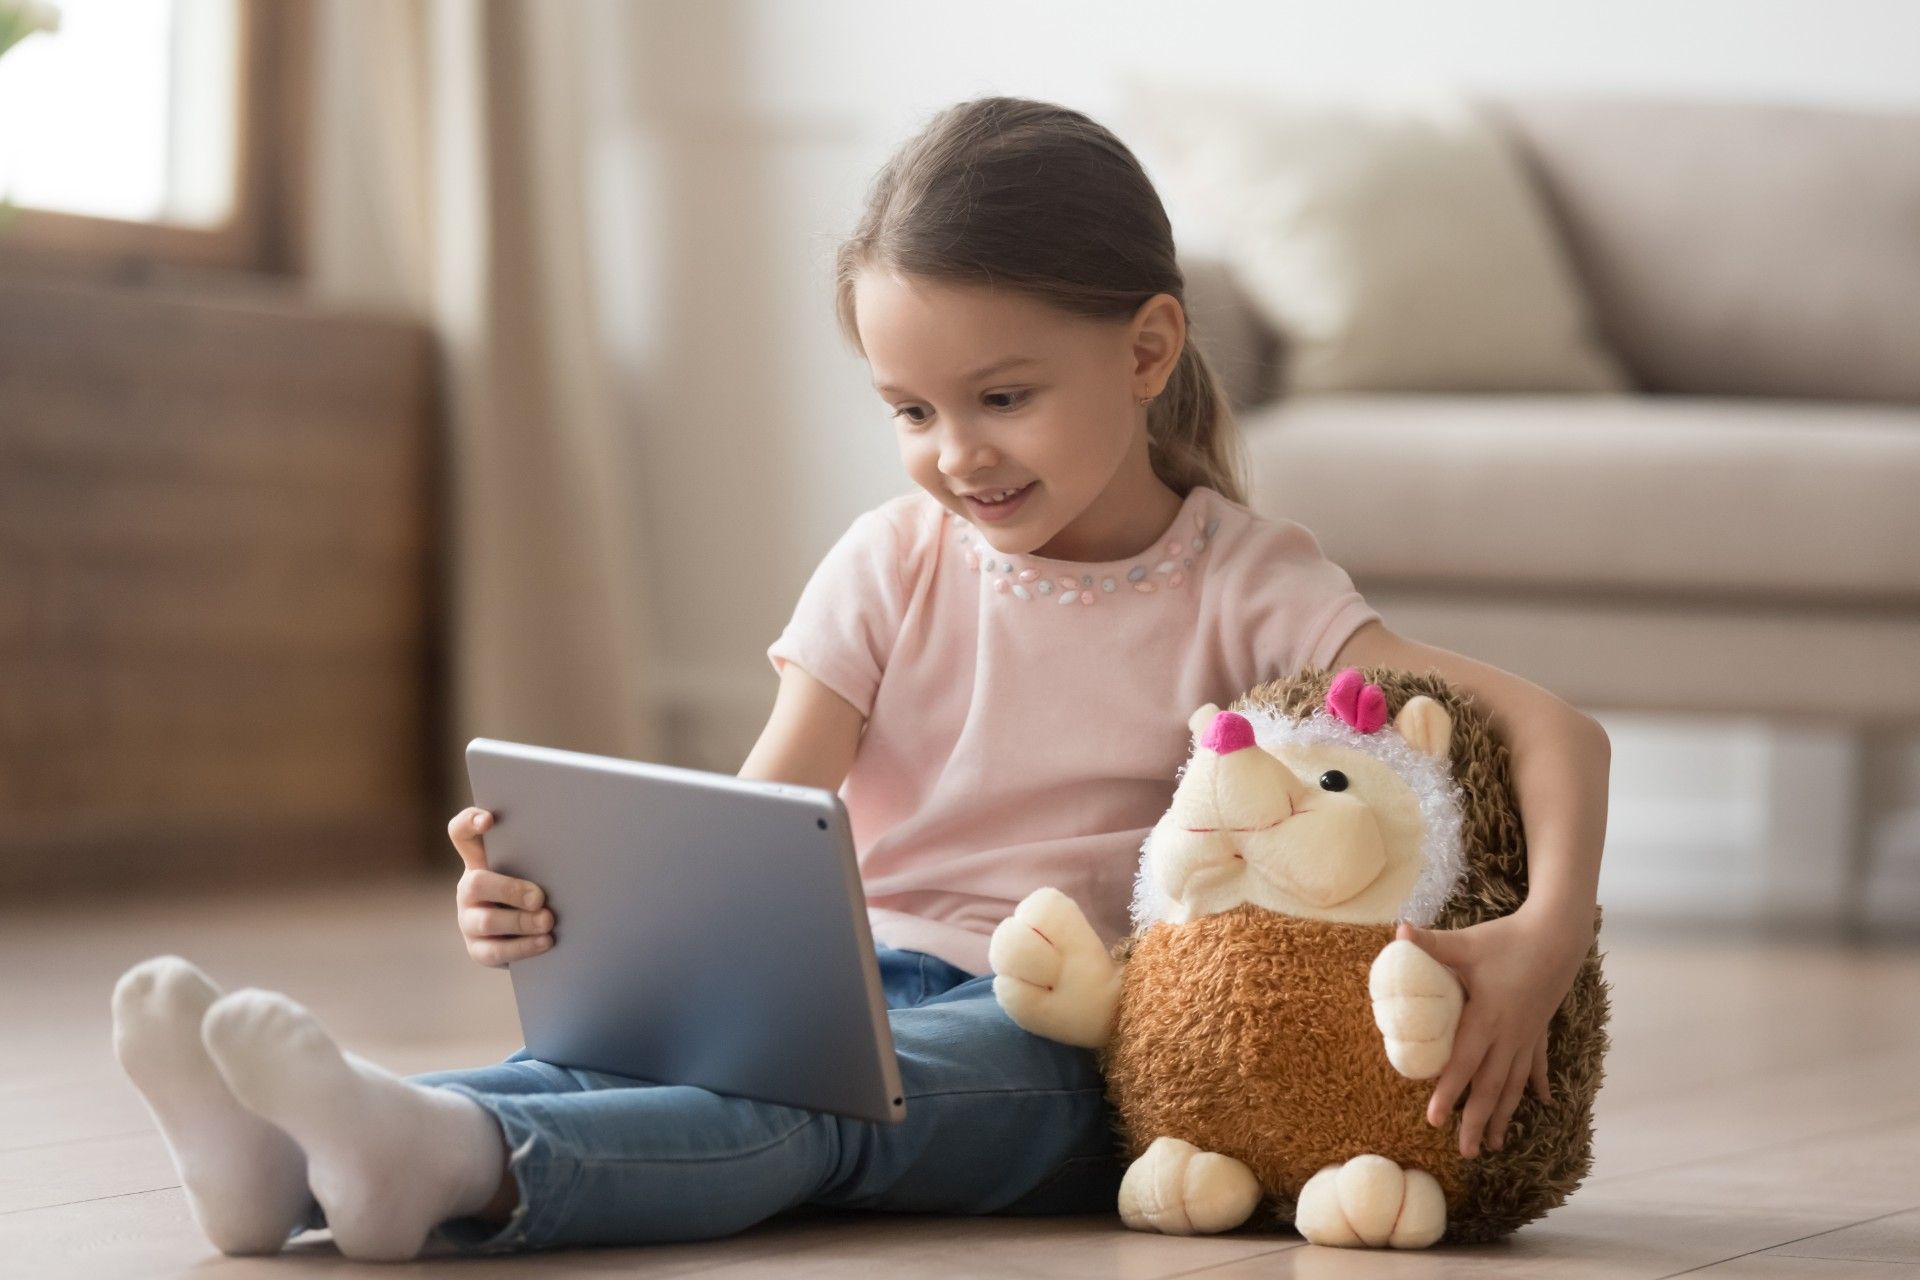 A young girl holds a stuffed hedgehog while sitting on the floor watching something on an ipad - youtube privacy